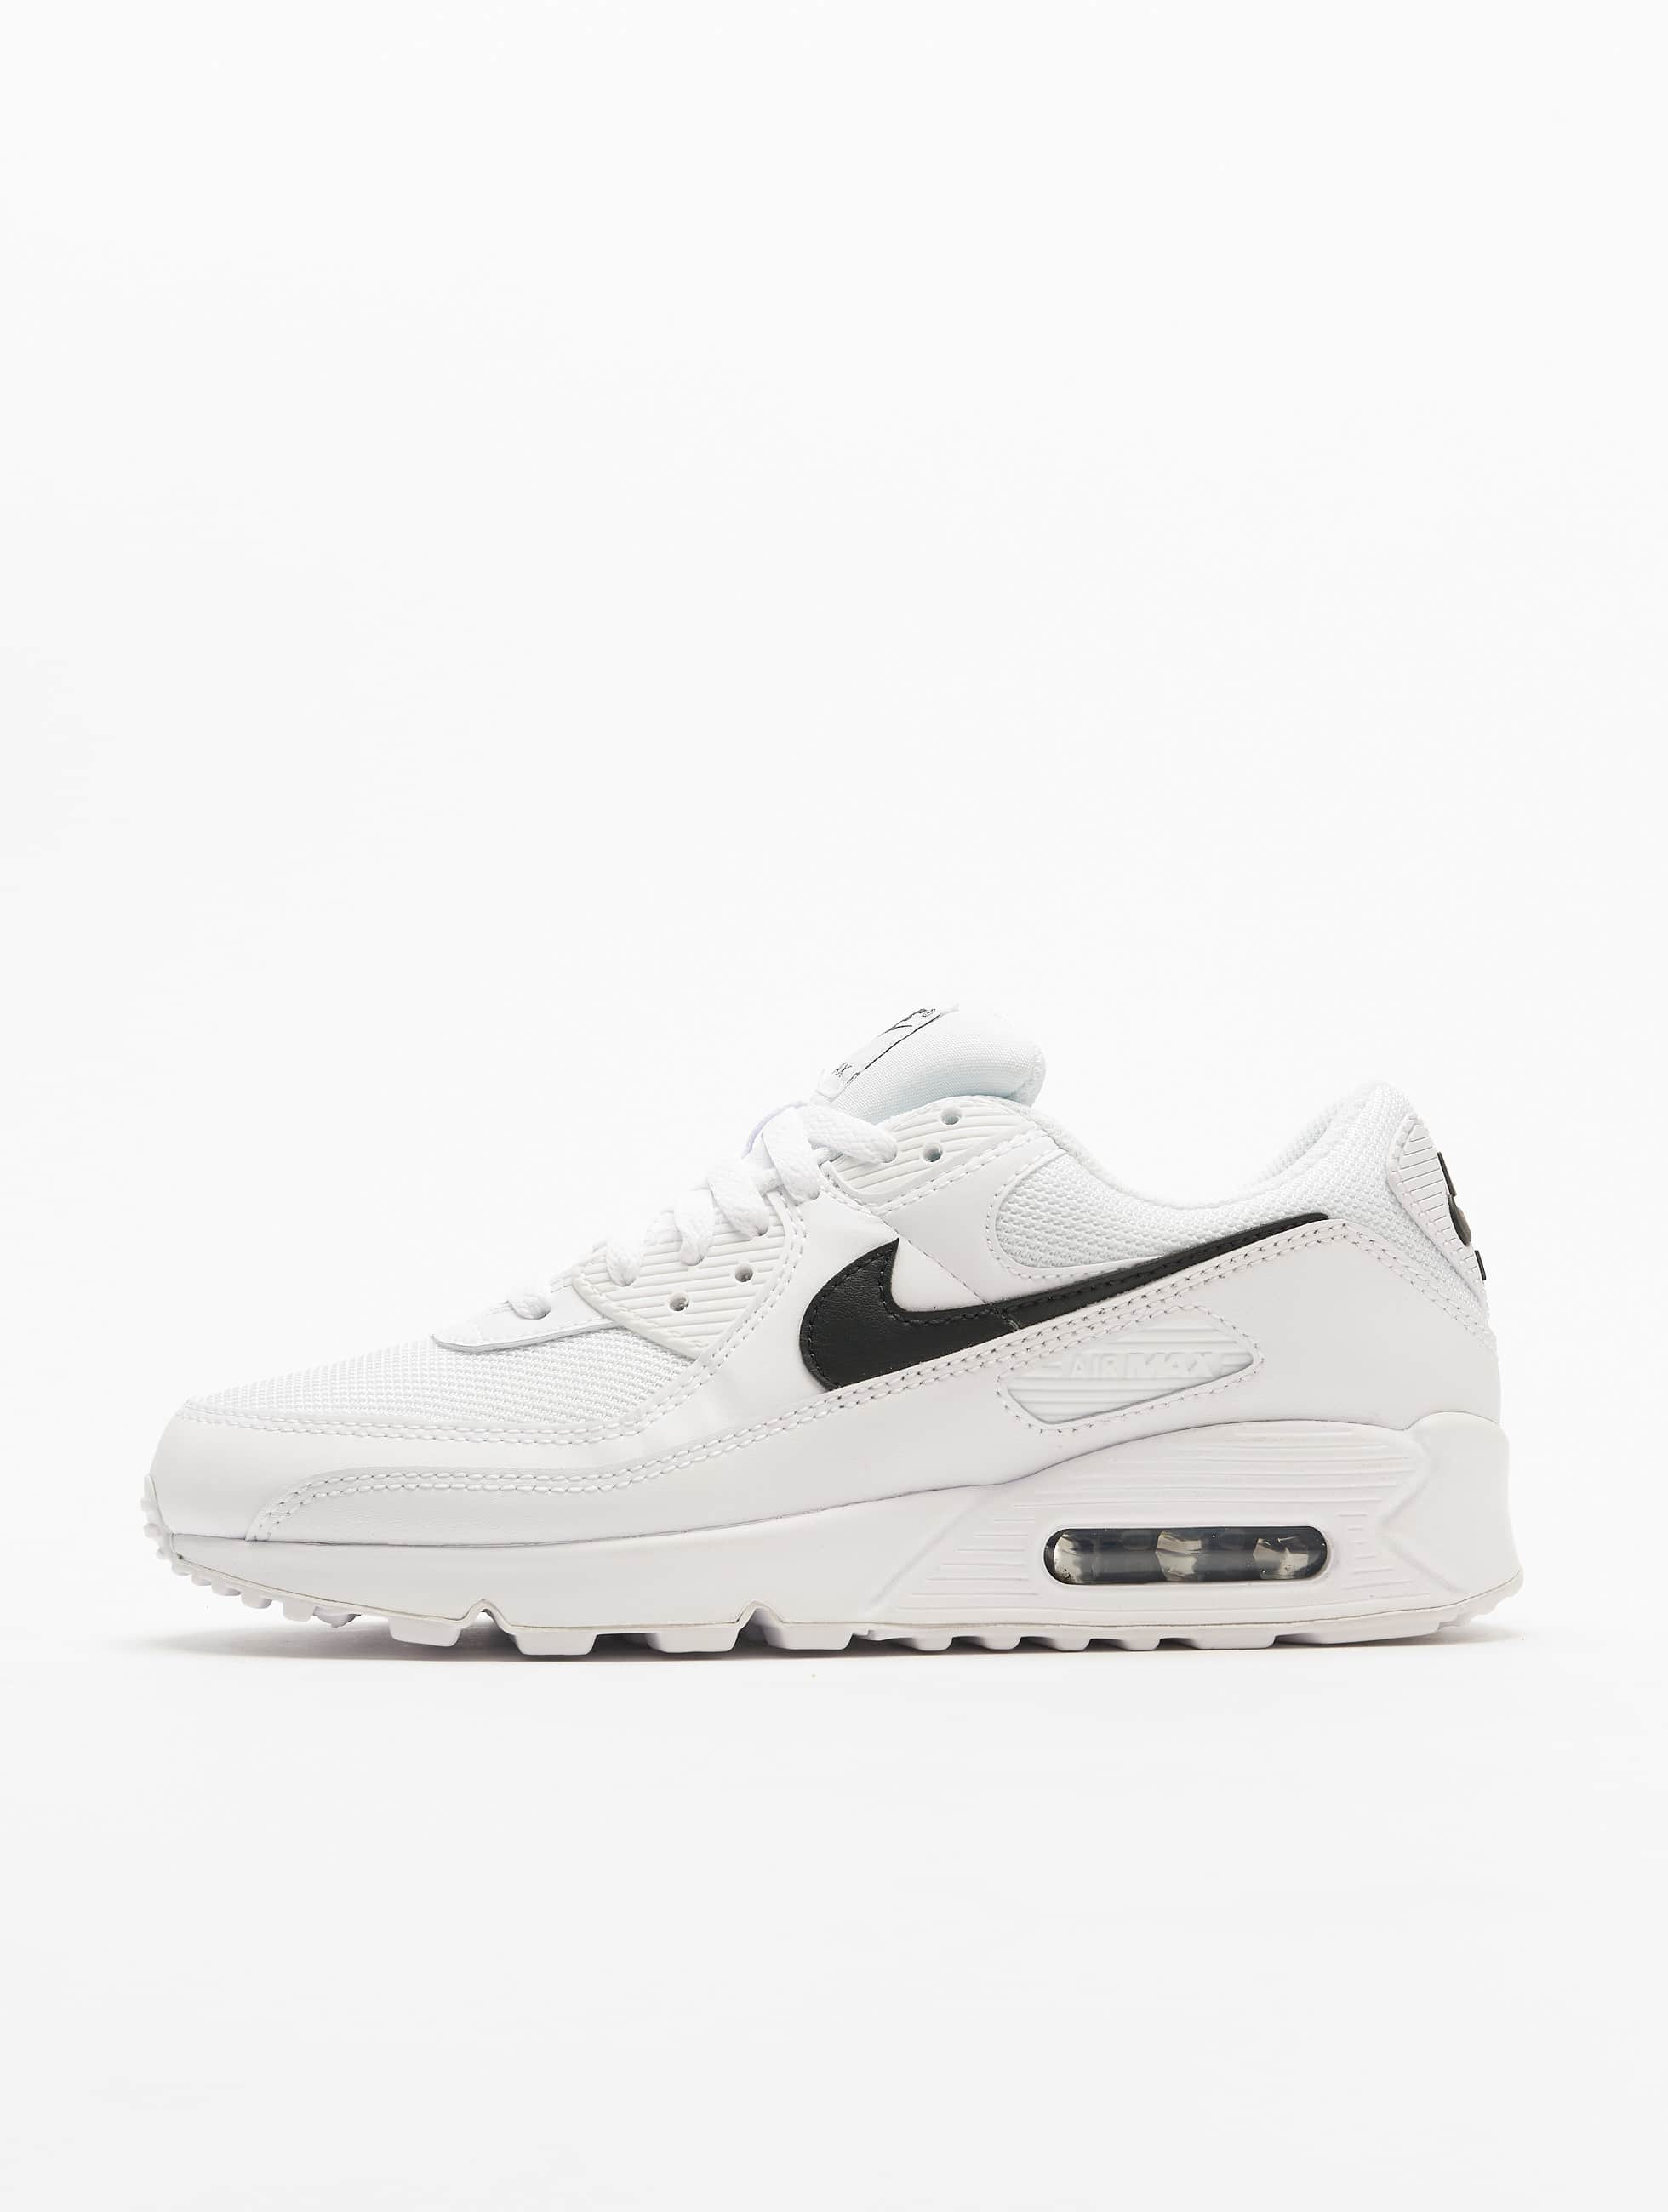 nike air max wit dames> OFF-72%